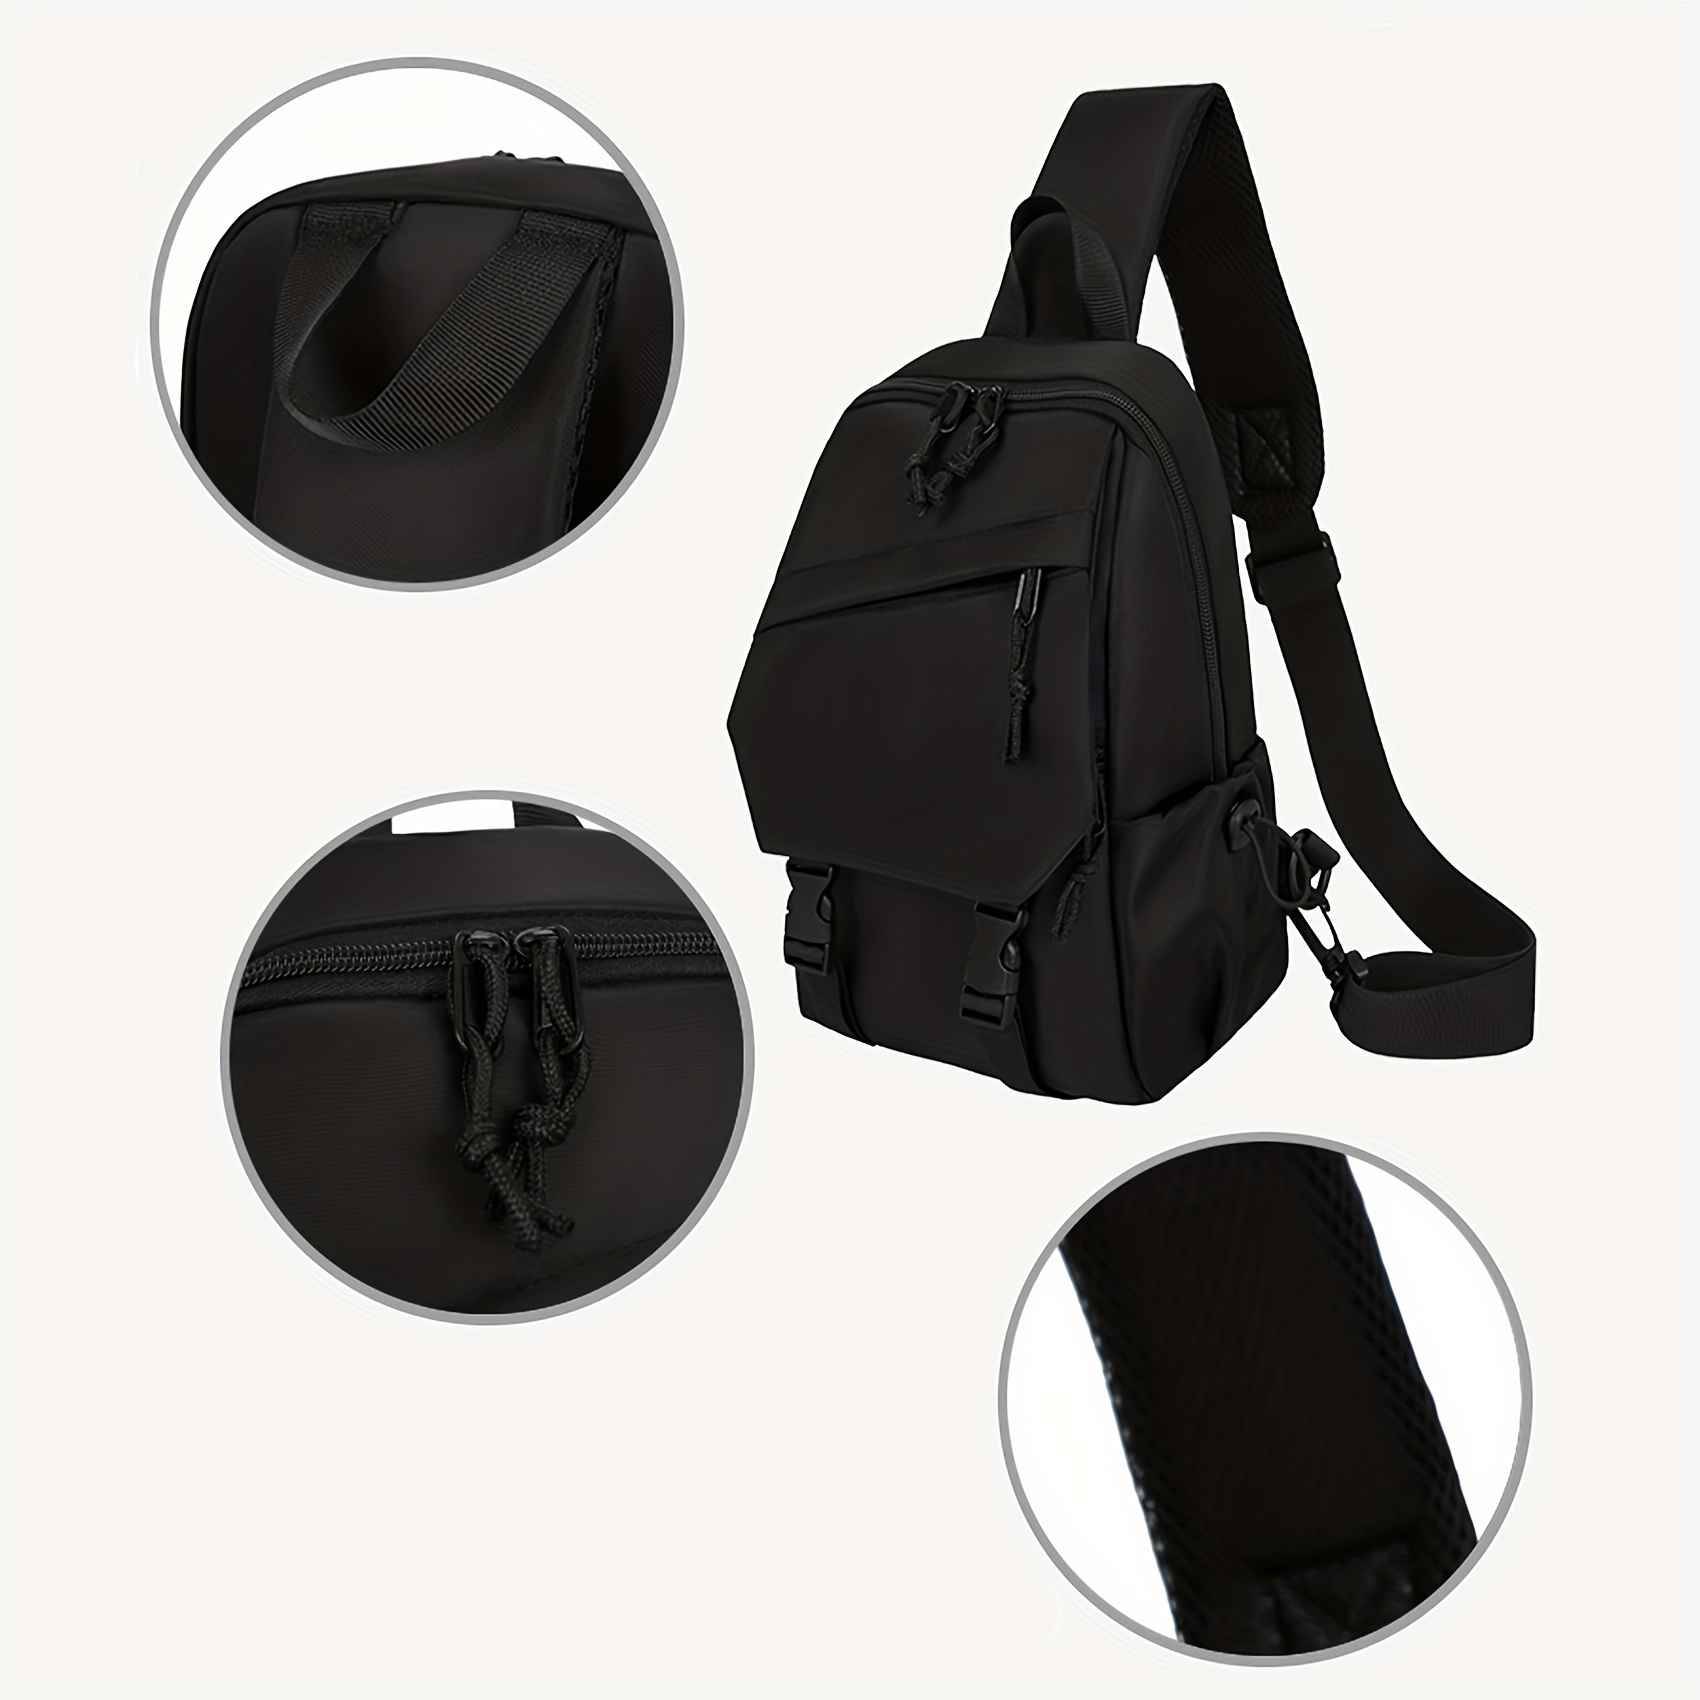 Men's New Fashion Casual Business Shoulder Bags Travel Sports